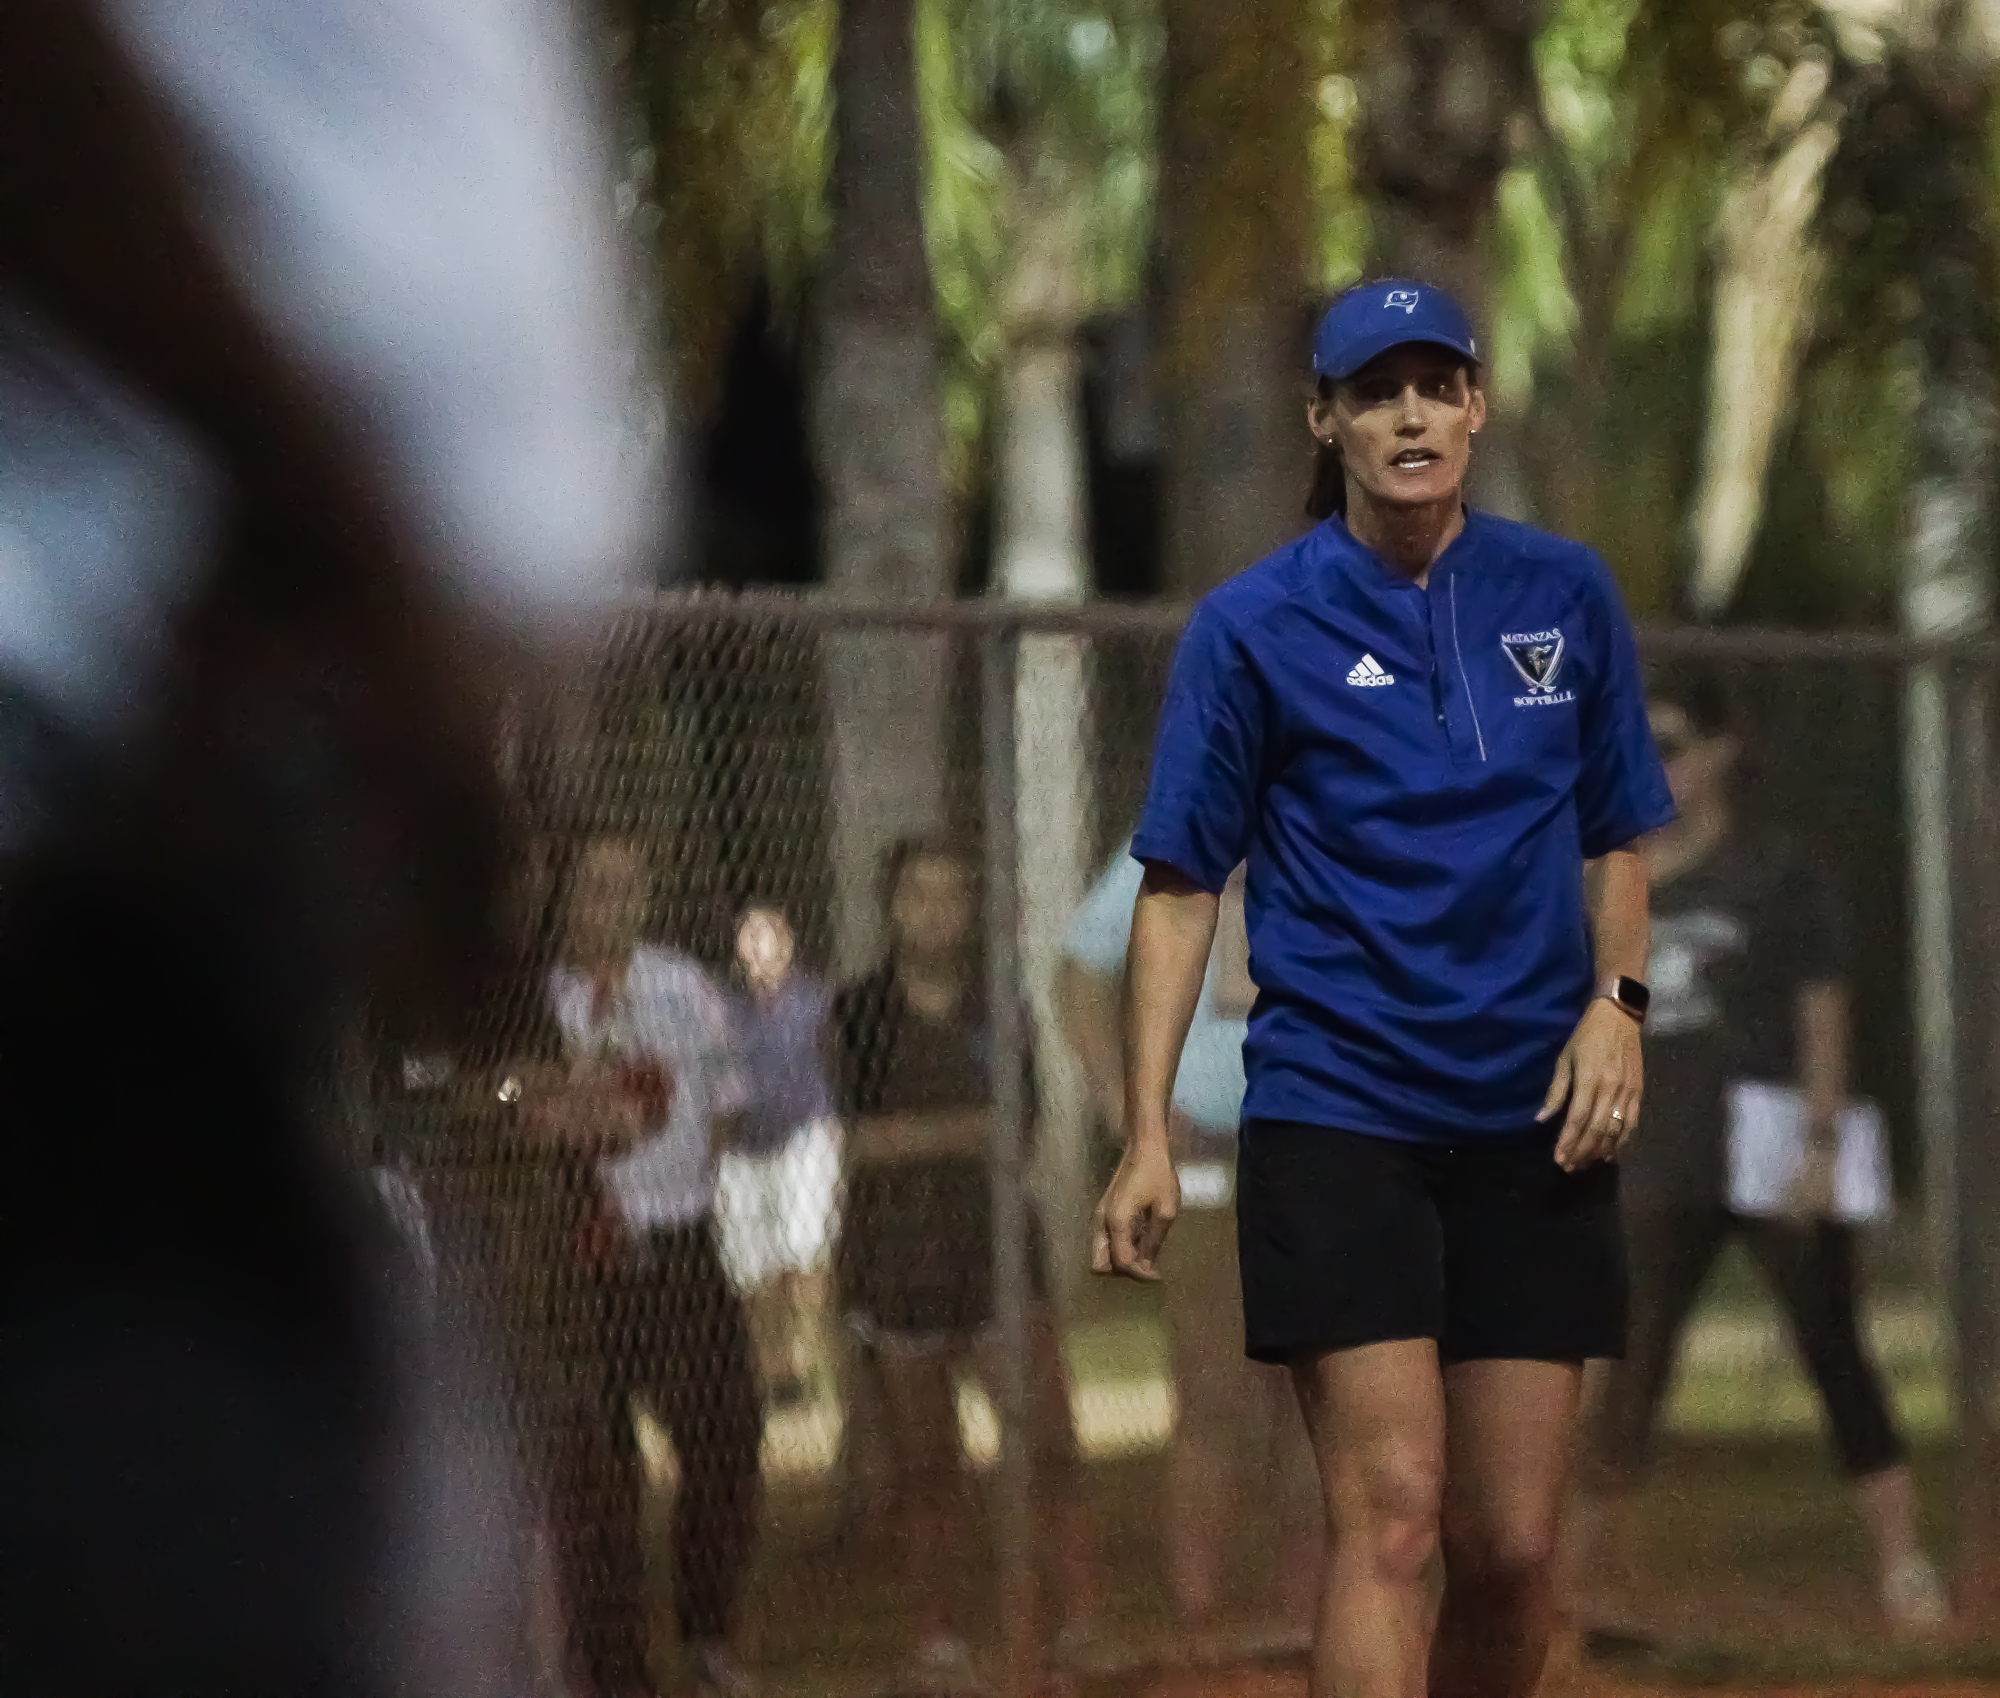 Matanzas softball coach Sabrina Manhart gives instructions to a Pirates batter during their season opener against Seabreeze. Photo by Ray Boone